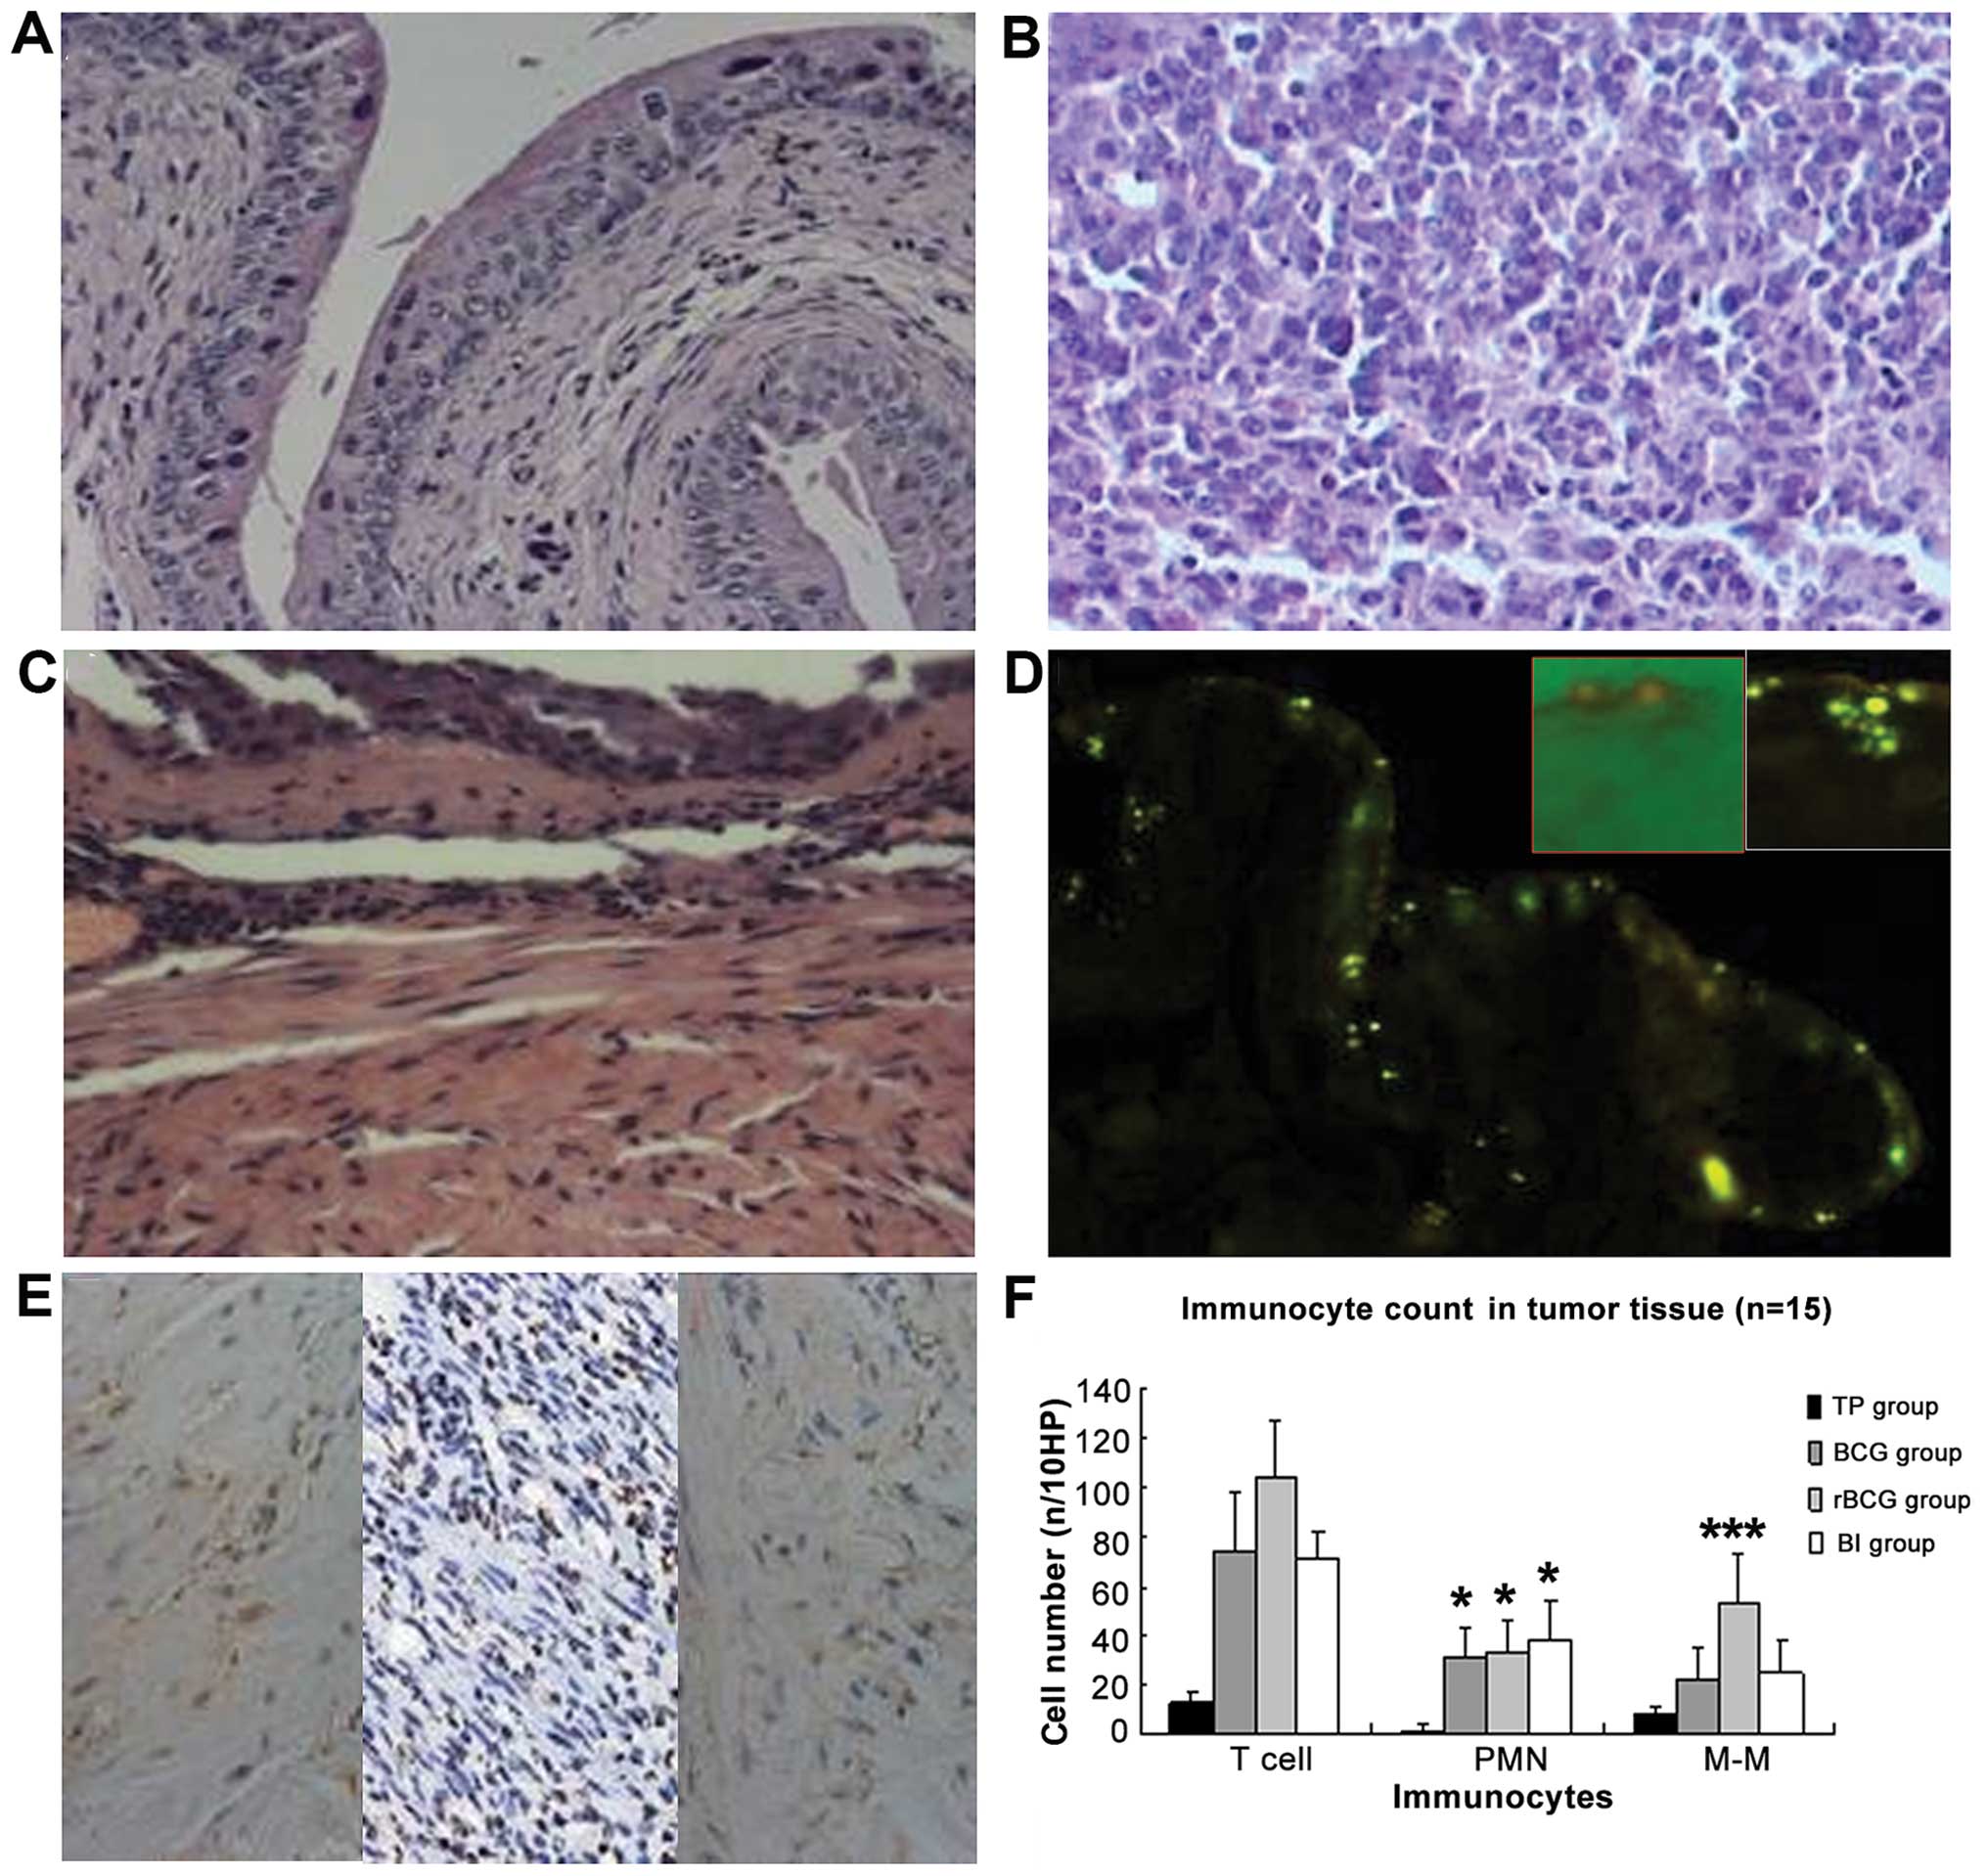 Recombinant Hifn b g Inhibits Tumor Growth In A Mouse Model Of Bladder Cancer